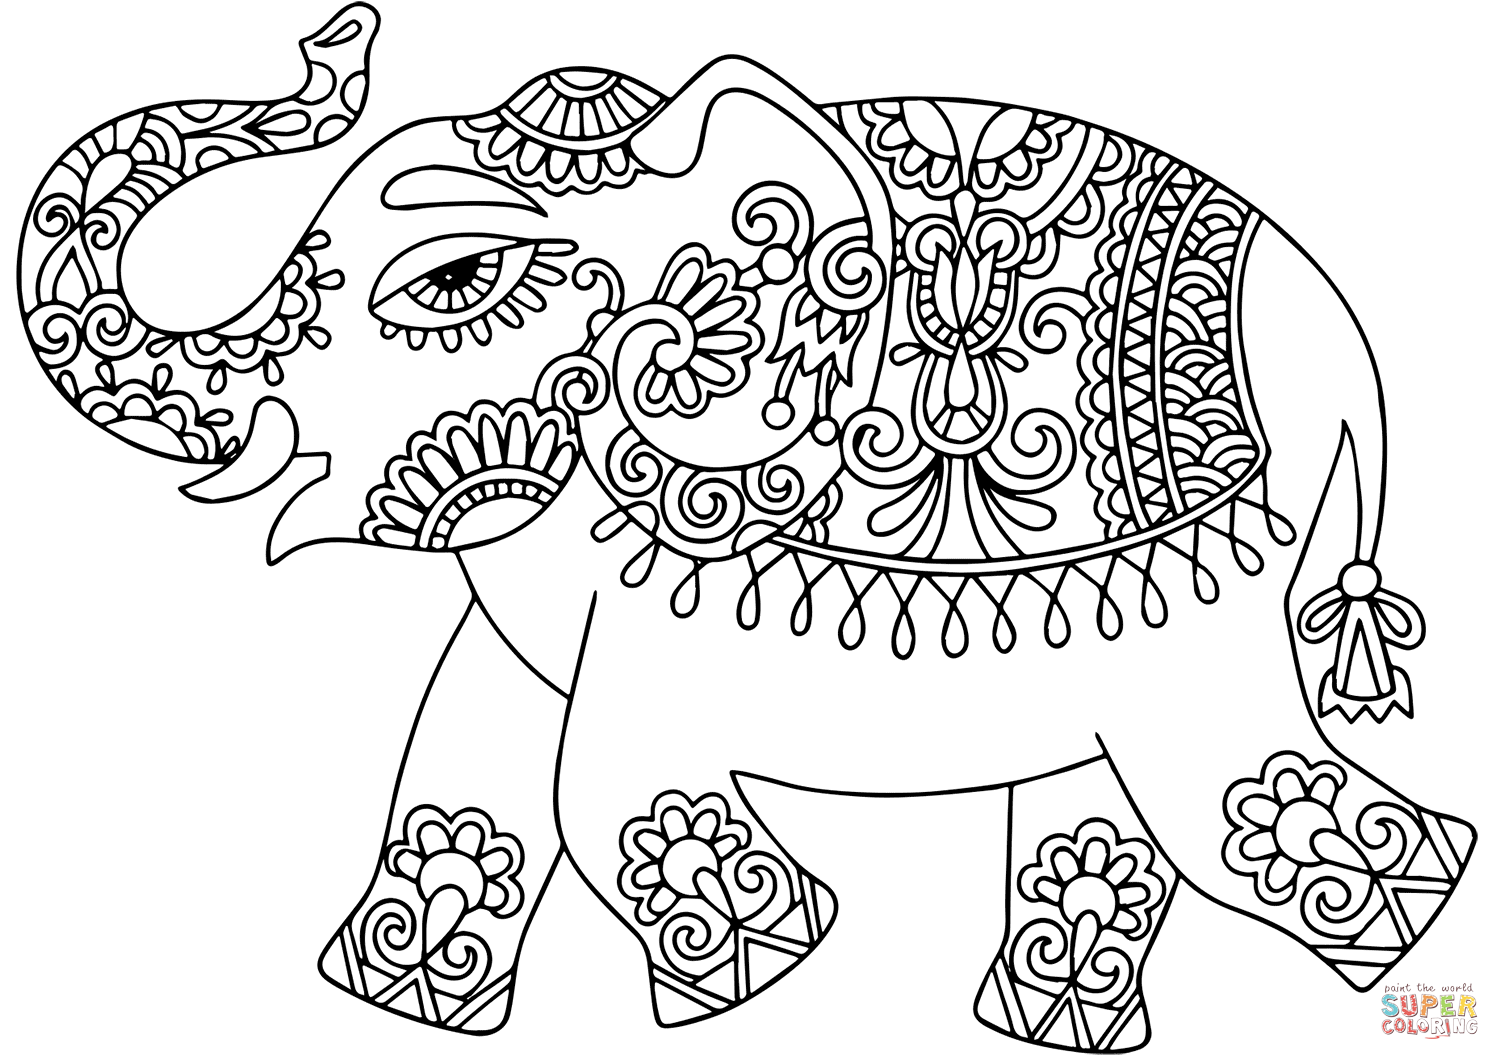 Elephant with Indian Pattern coloring page | Free Printable Coloring Pages